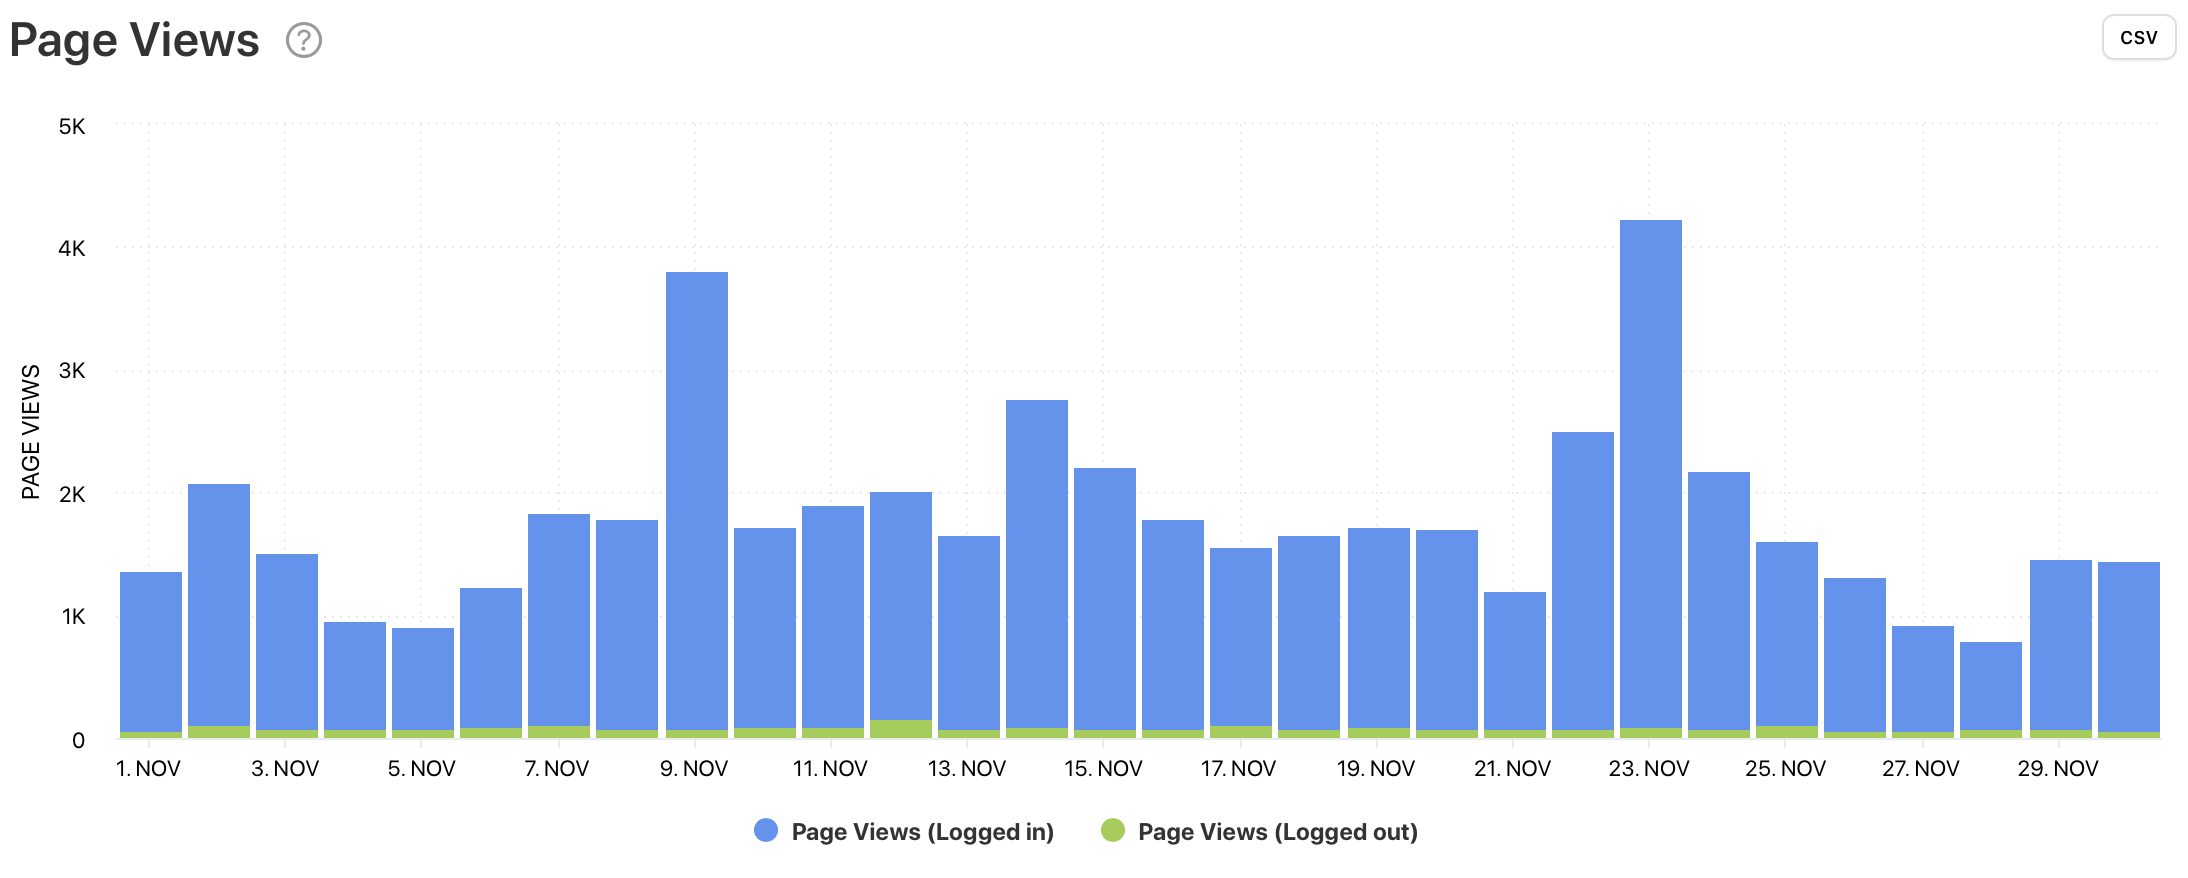 Page Views for a Facebook page, graph by Minter.io